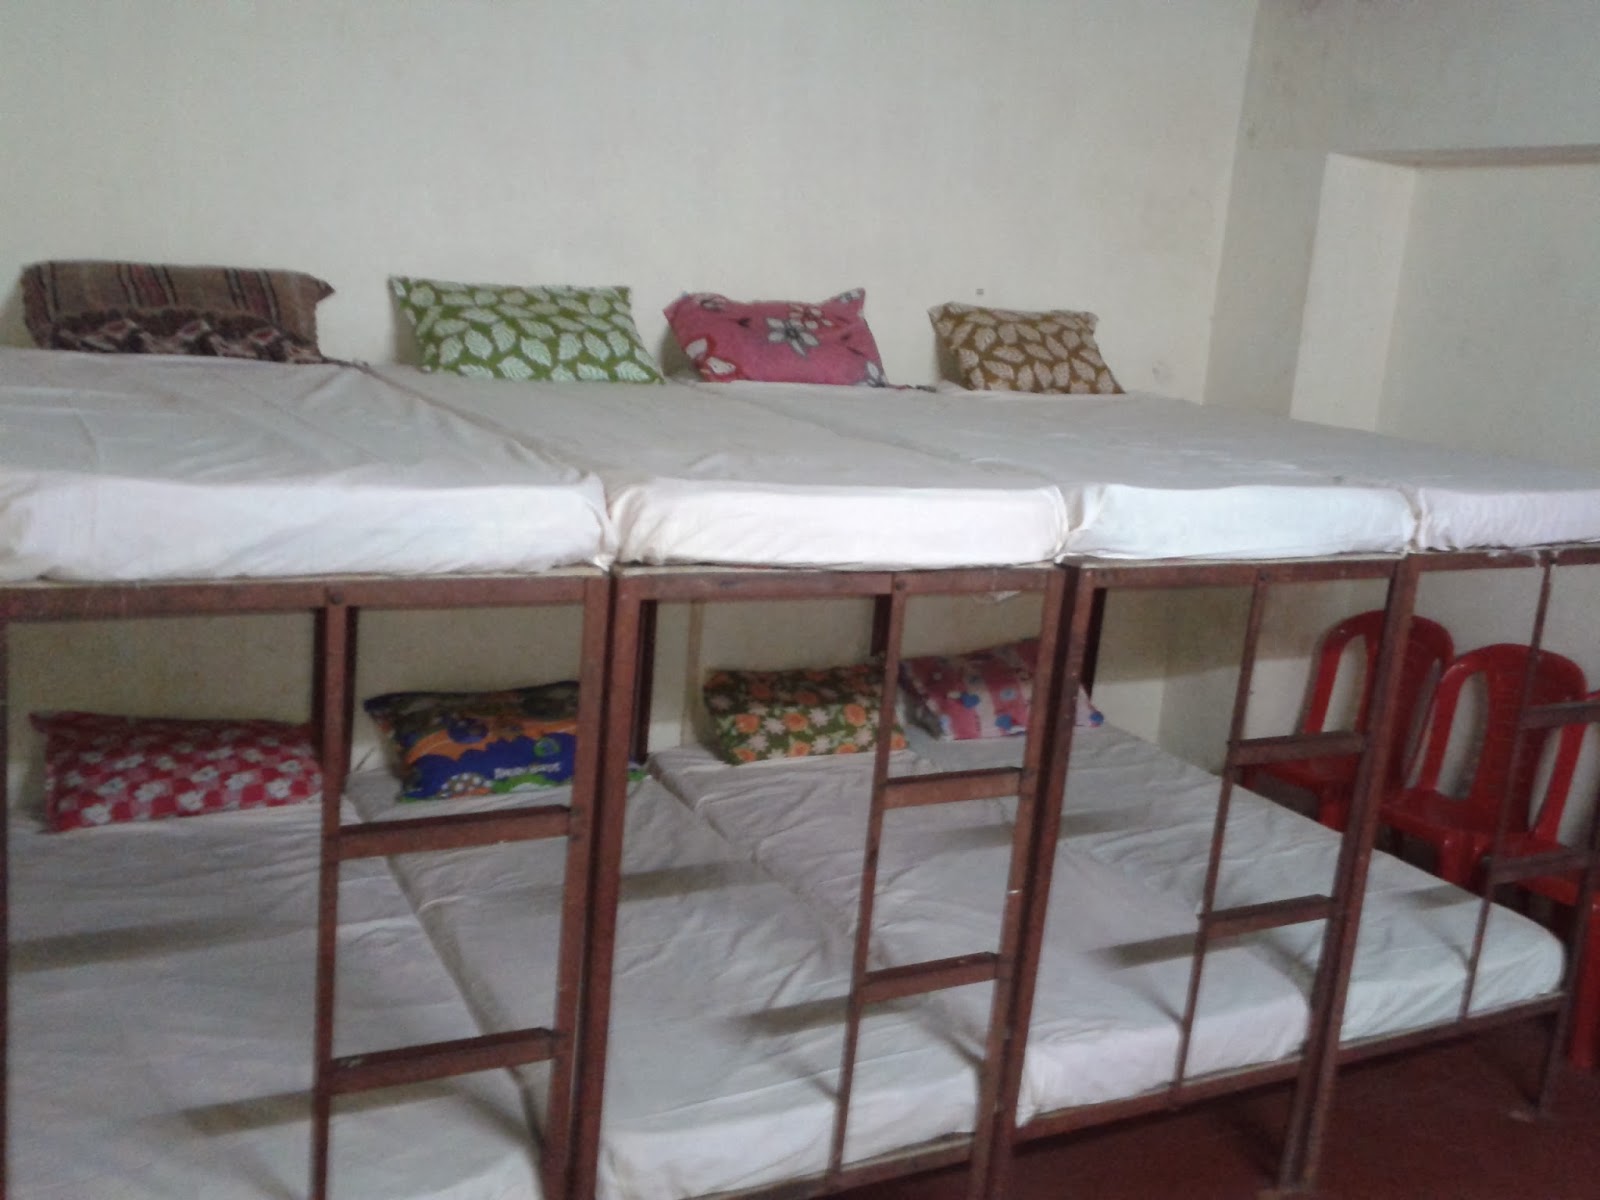 dormitory in munnar for 150 rupees , Rs.150/- per person dormitory in munnar, Munnar Dormitory, Dormitory in Munnar, Munnar Group stay Dormitory, munnar dormitory stay, dormitory room in munnar, munnar hotels dormitory, munnar dormitory stay, cheap dormitory in munnar, dormitory in munnar with tariif, dormitory available in munnar 